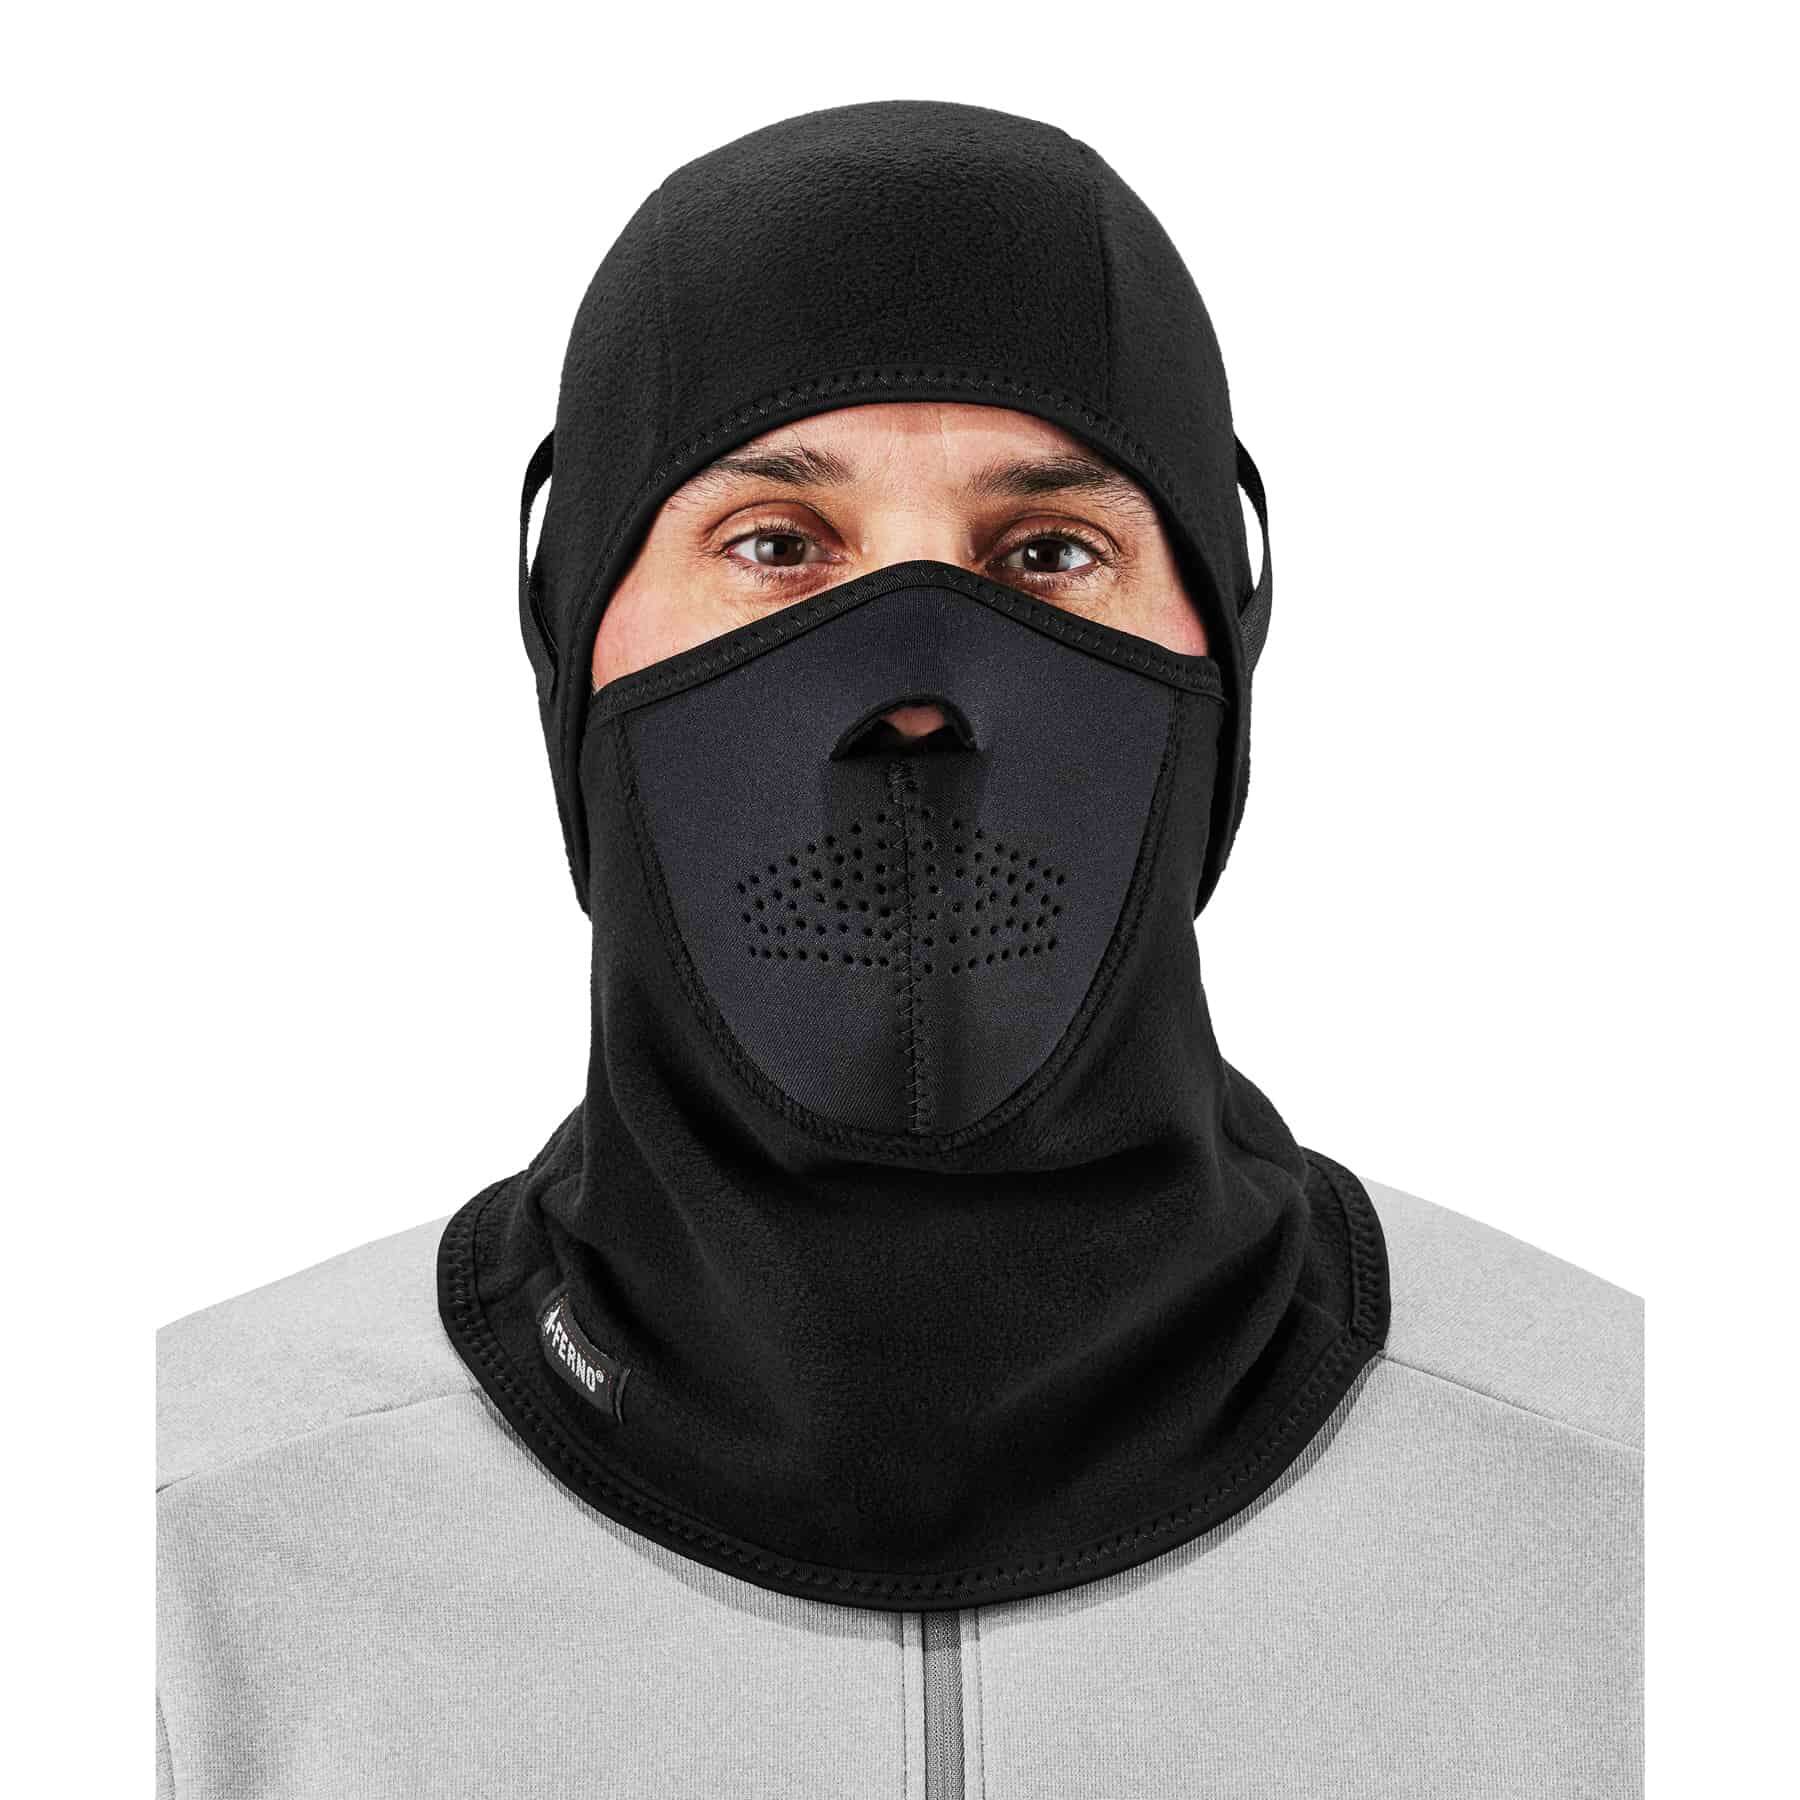 KINGBIKE Balaclava Ski Mask for Men Women Water Resistant and Windproof  Fleece Thermal Full Face Mask Cold Weather Gear